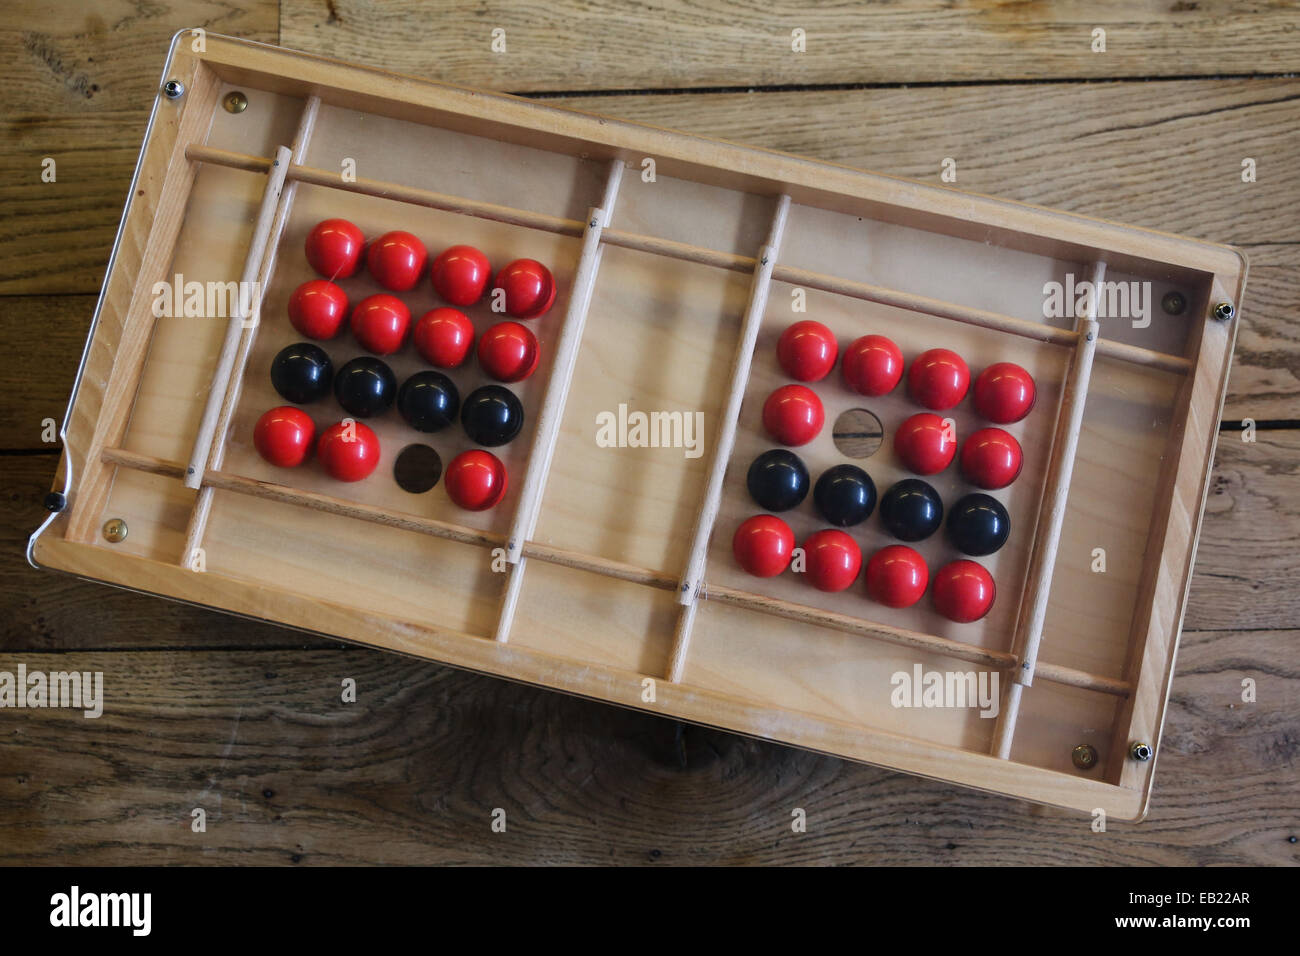 old wooden toy red black balls Stock Photo